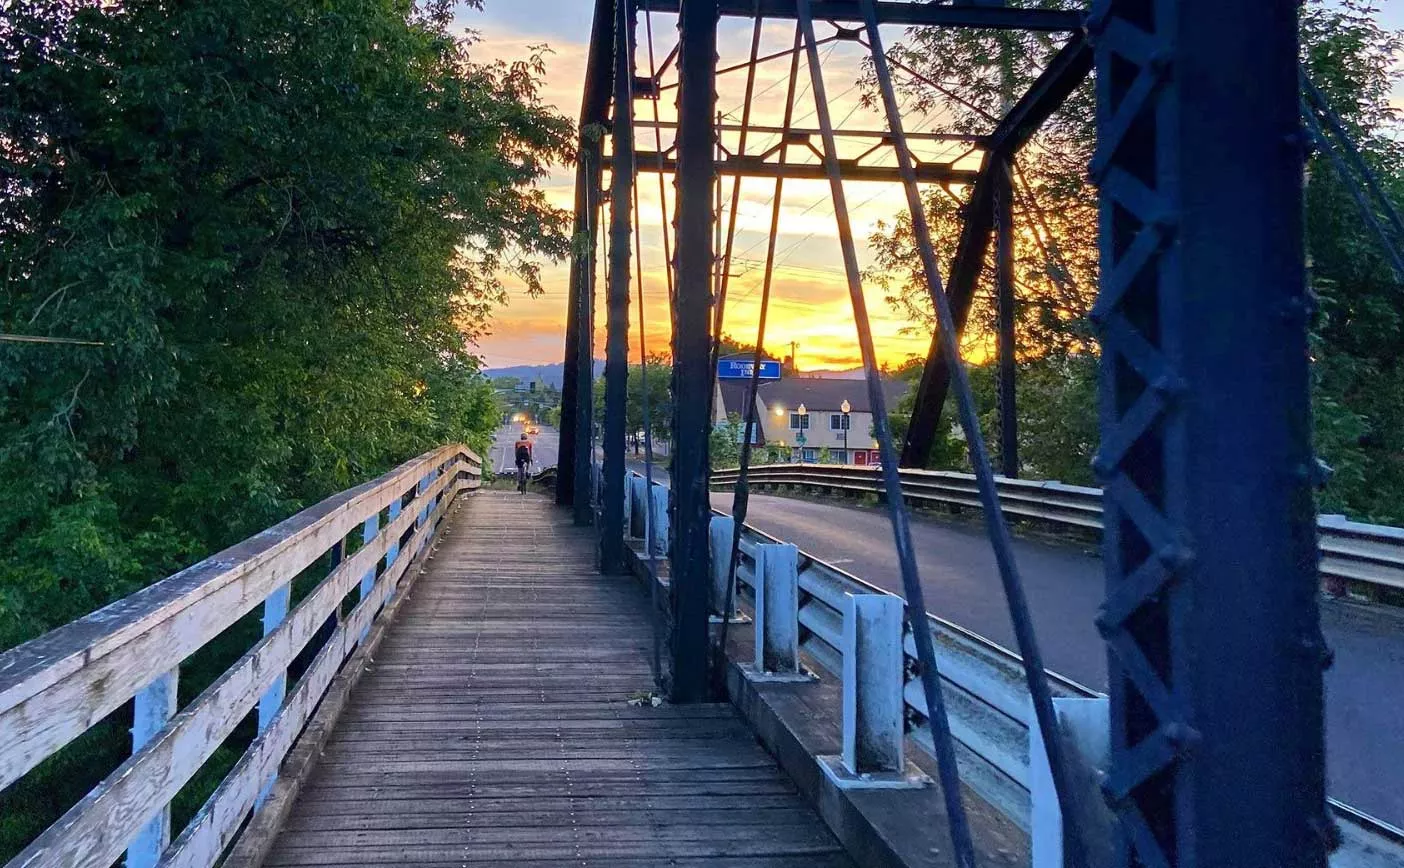 person on bicycle crossing over bridge in Corvallis